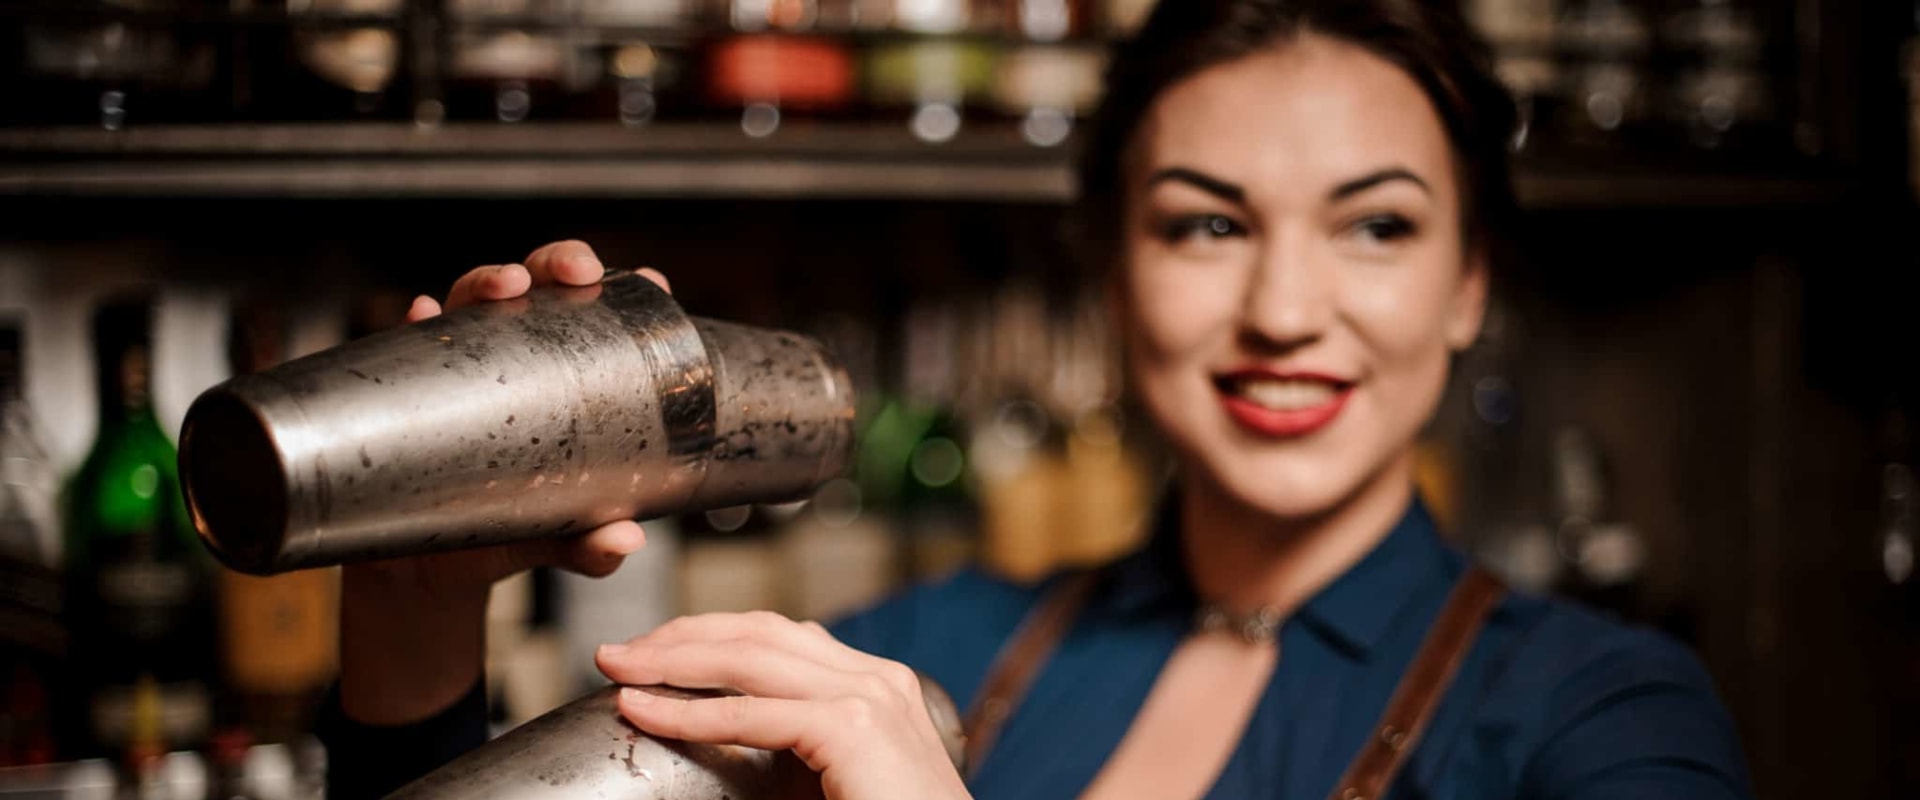 How Professional Bartenders Can Stay Organized and Efficient